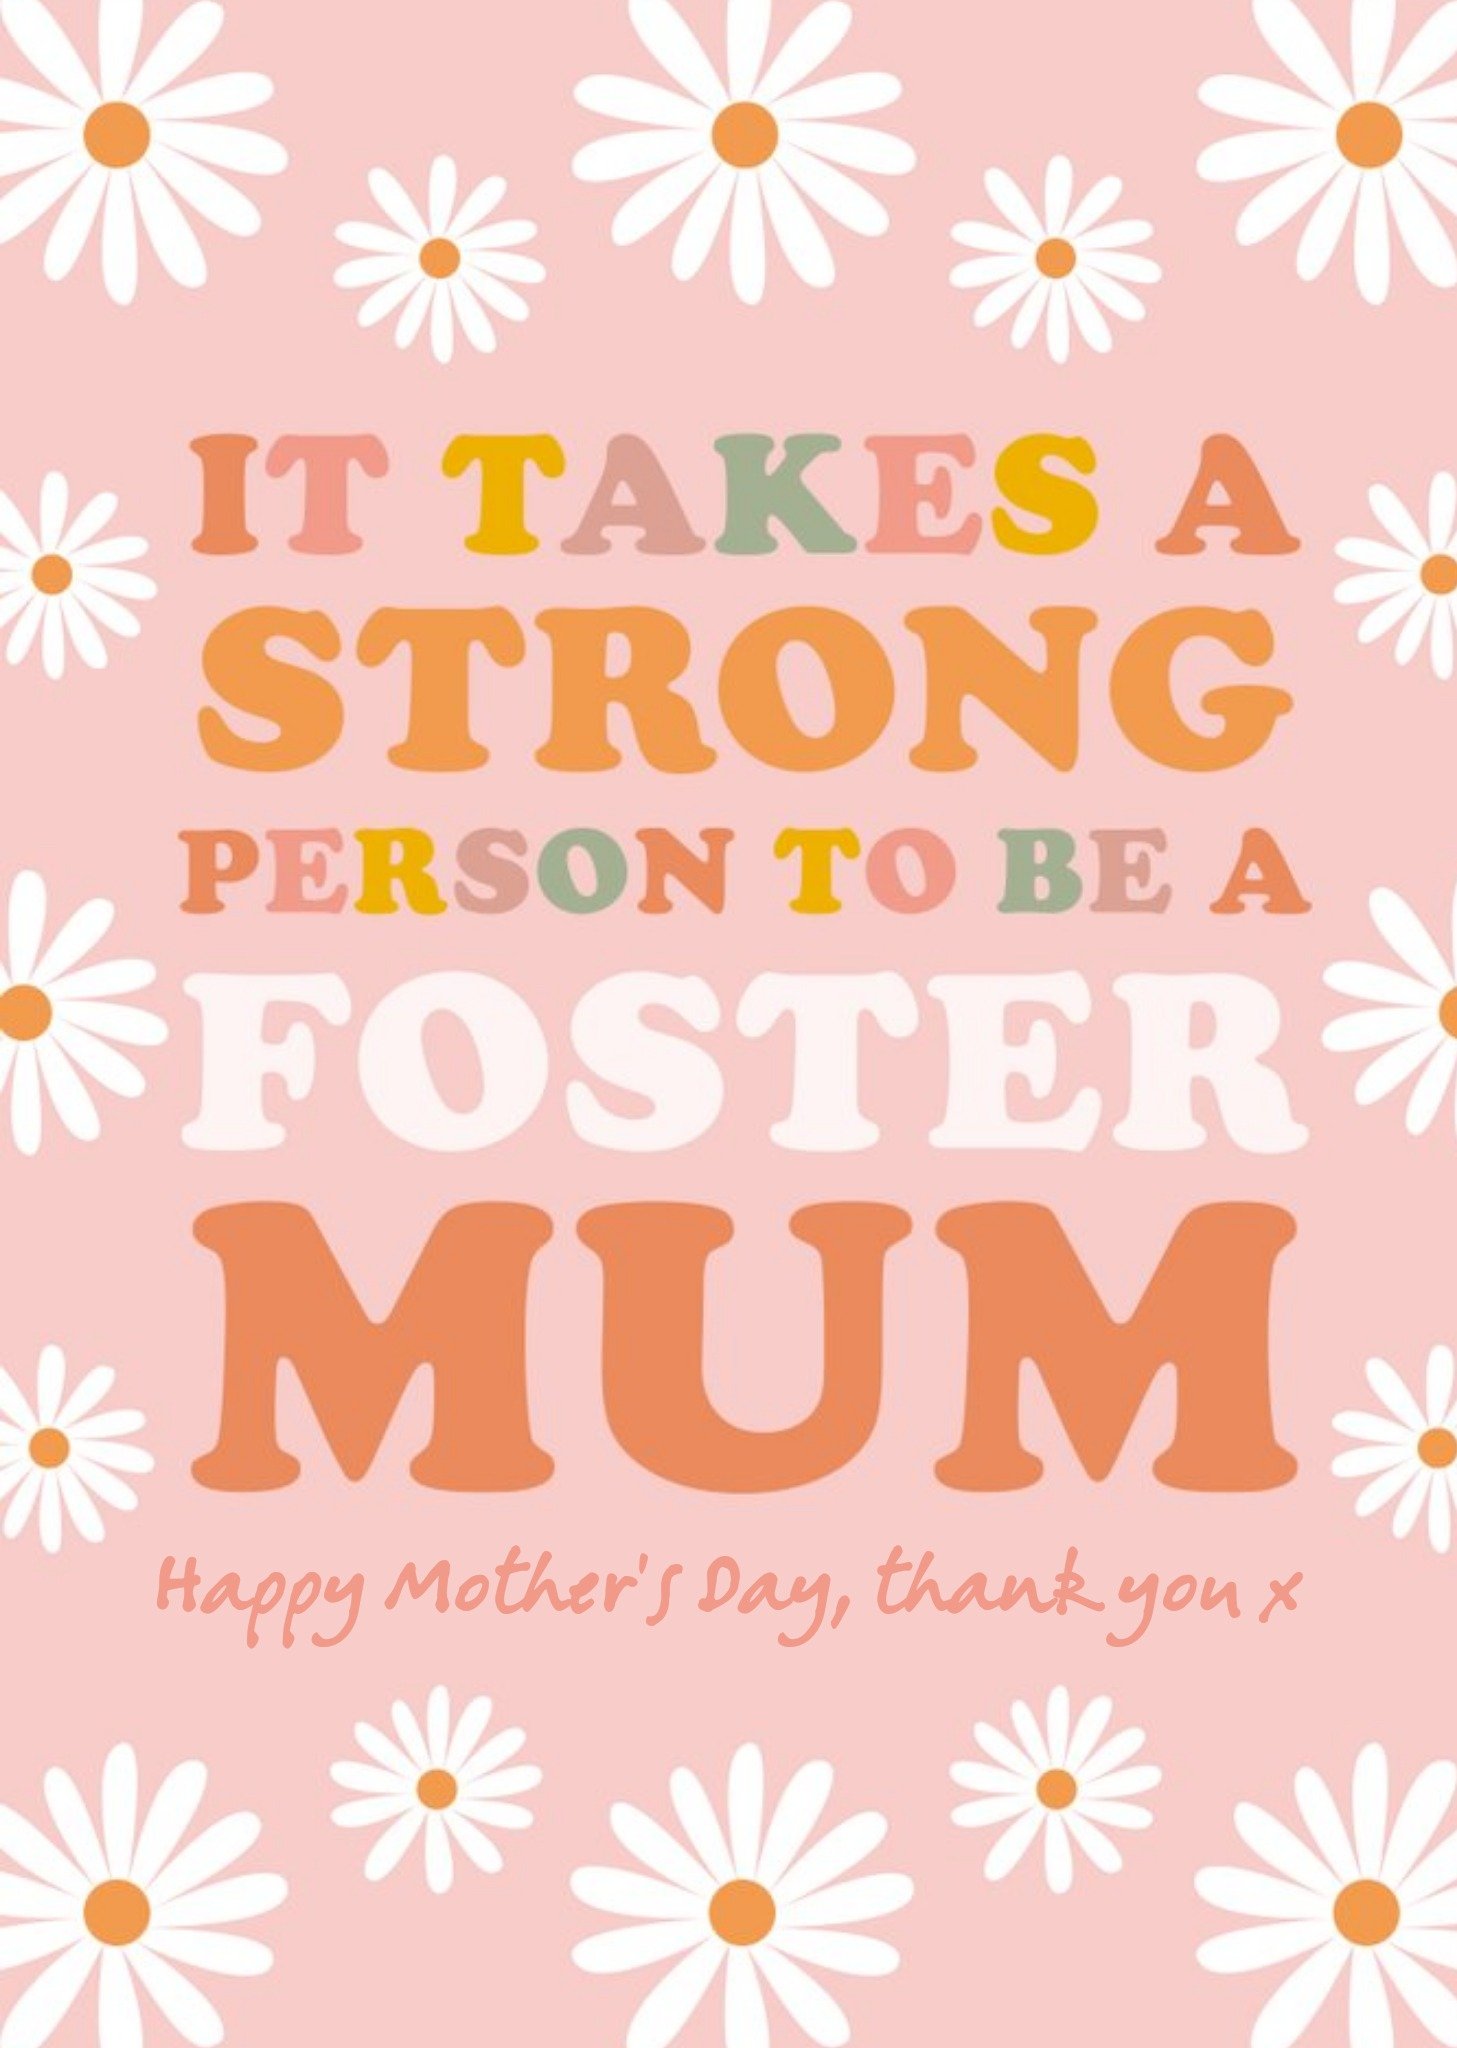 Moonpig It Takes A Strong Person To Be A Foster Mum Mother's Day Card Ecard